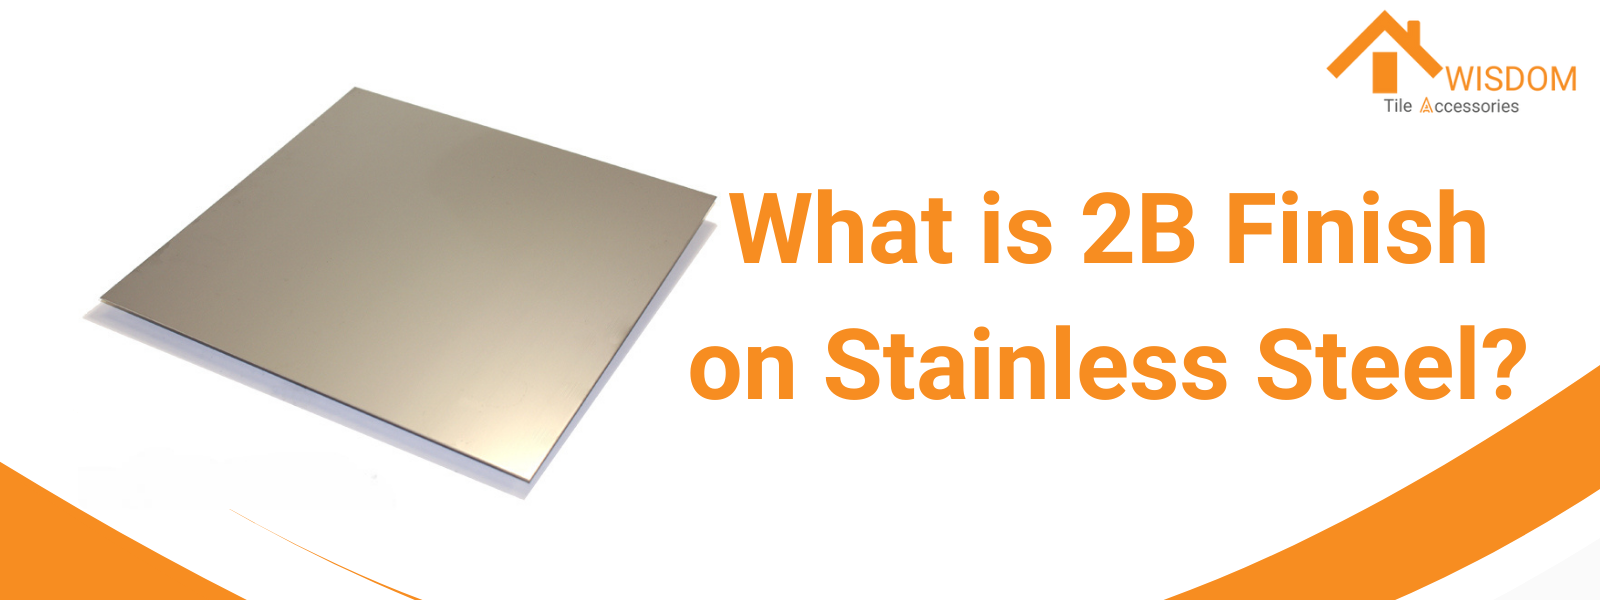 What is 2B Finish on Stainless Steel?